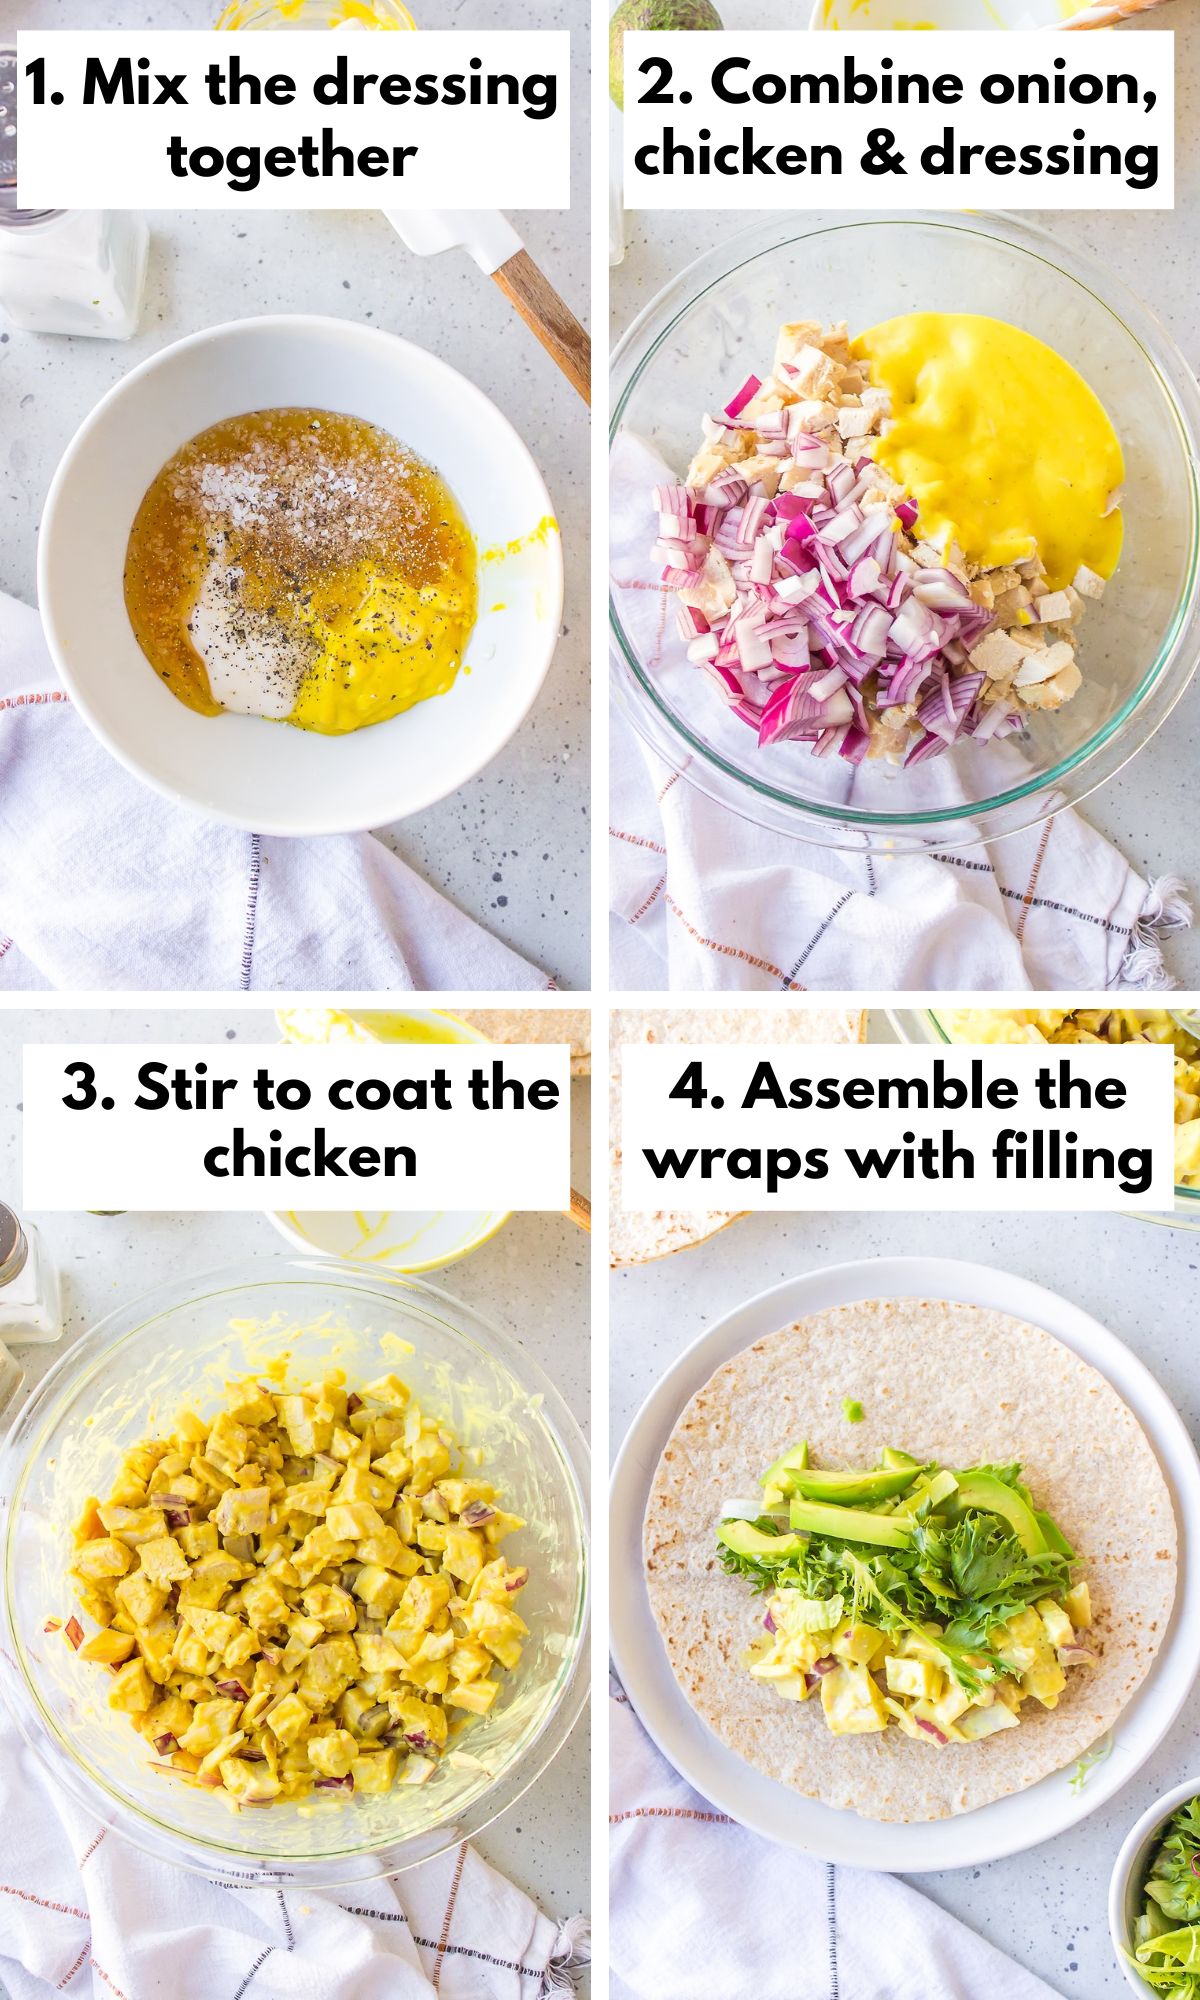 the process for making Honey Mustard Chicken Wraps.